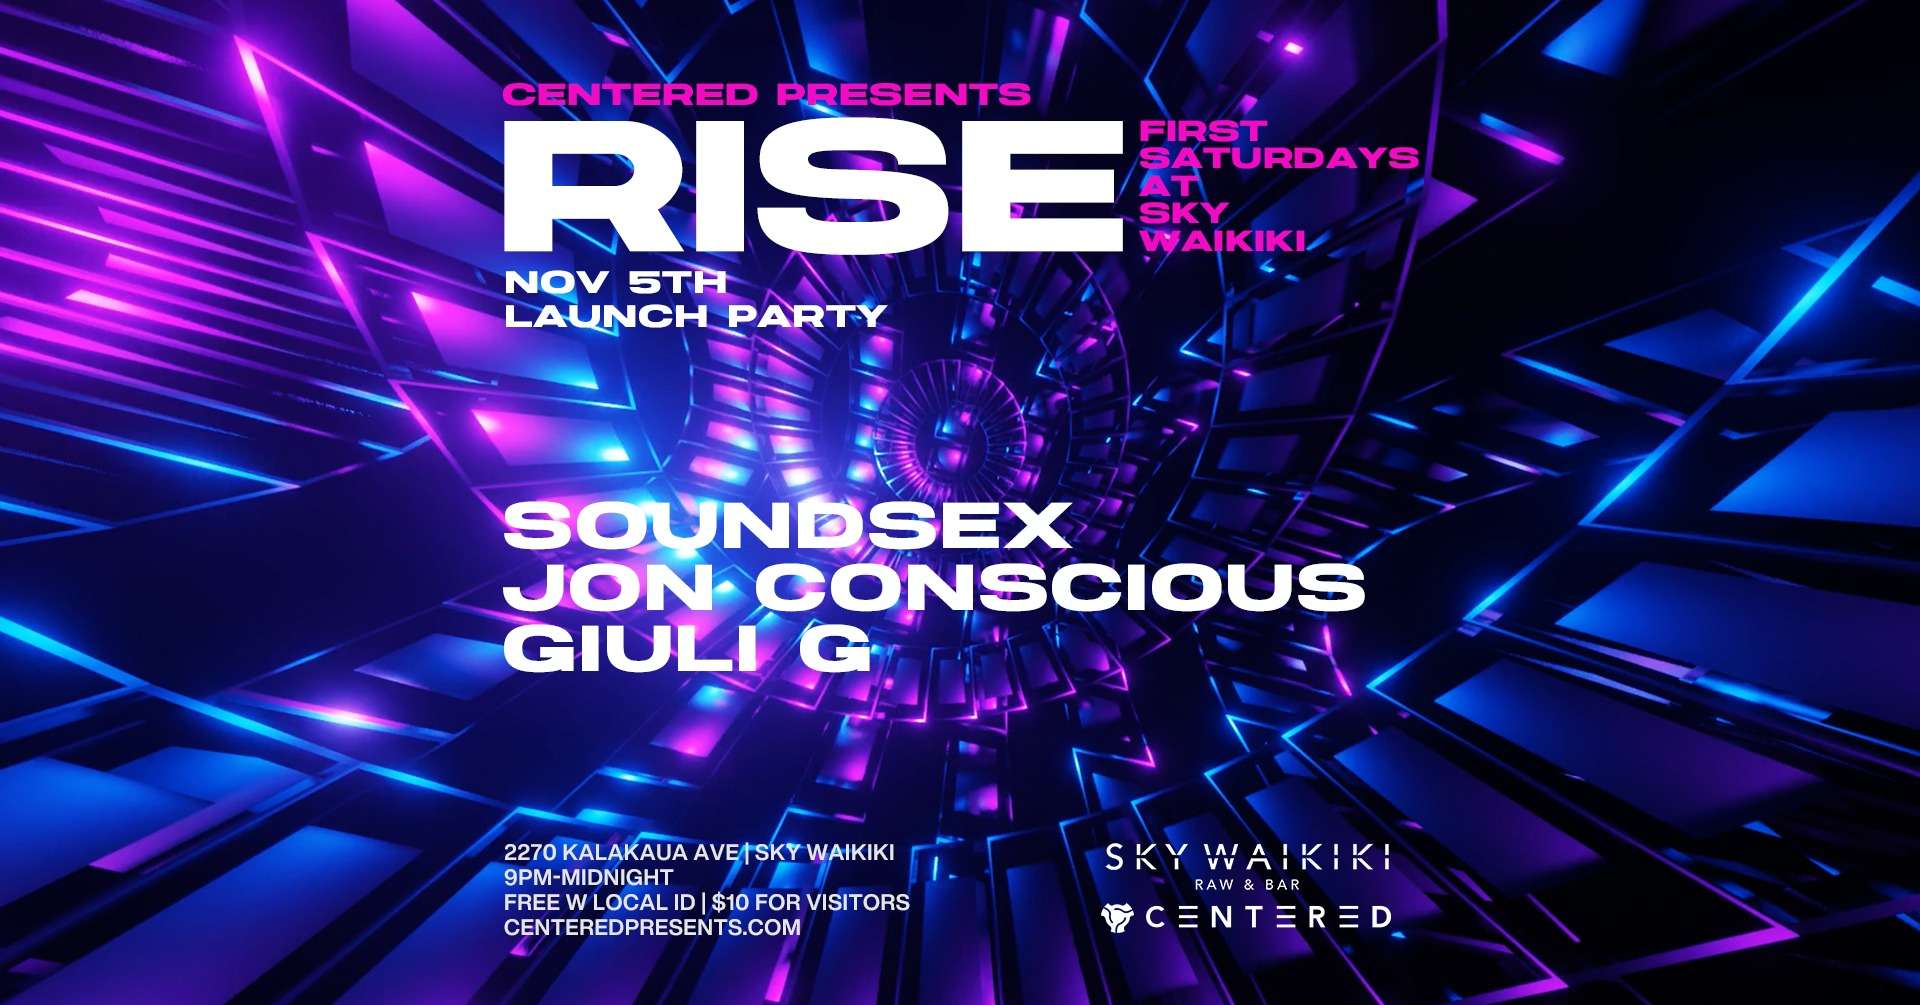 CENTERED PRESENTS, RISE at SKY WAIKIKI (Launch Party) - CENTERED Hawaii